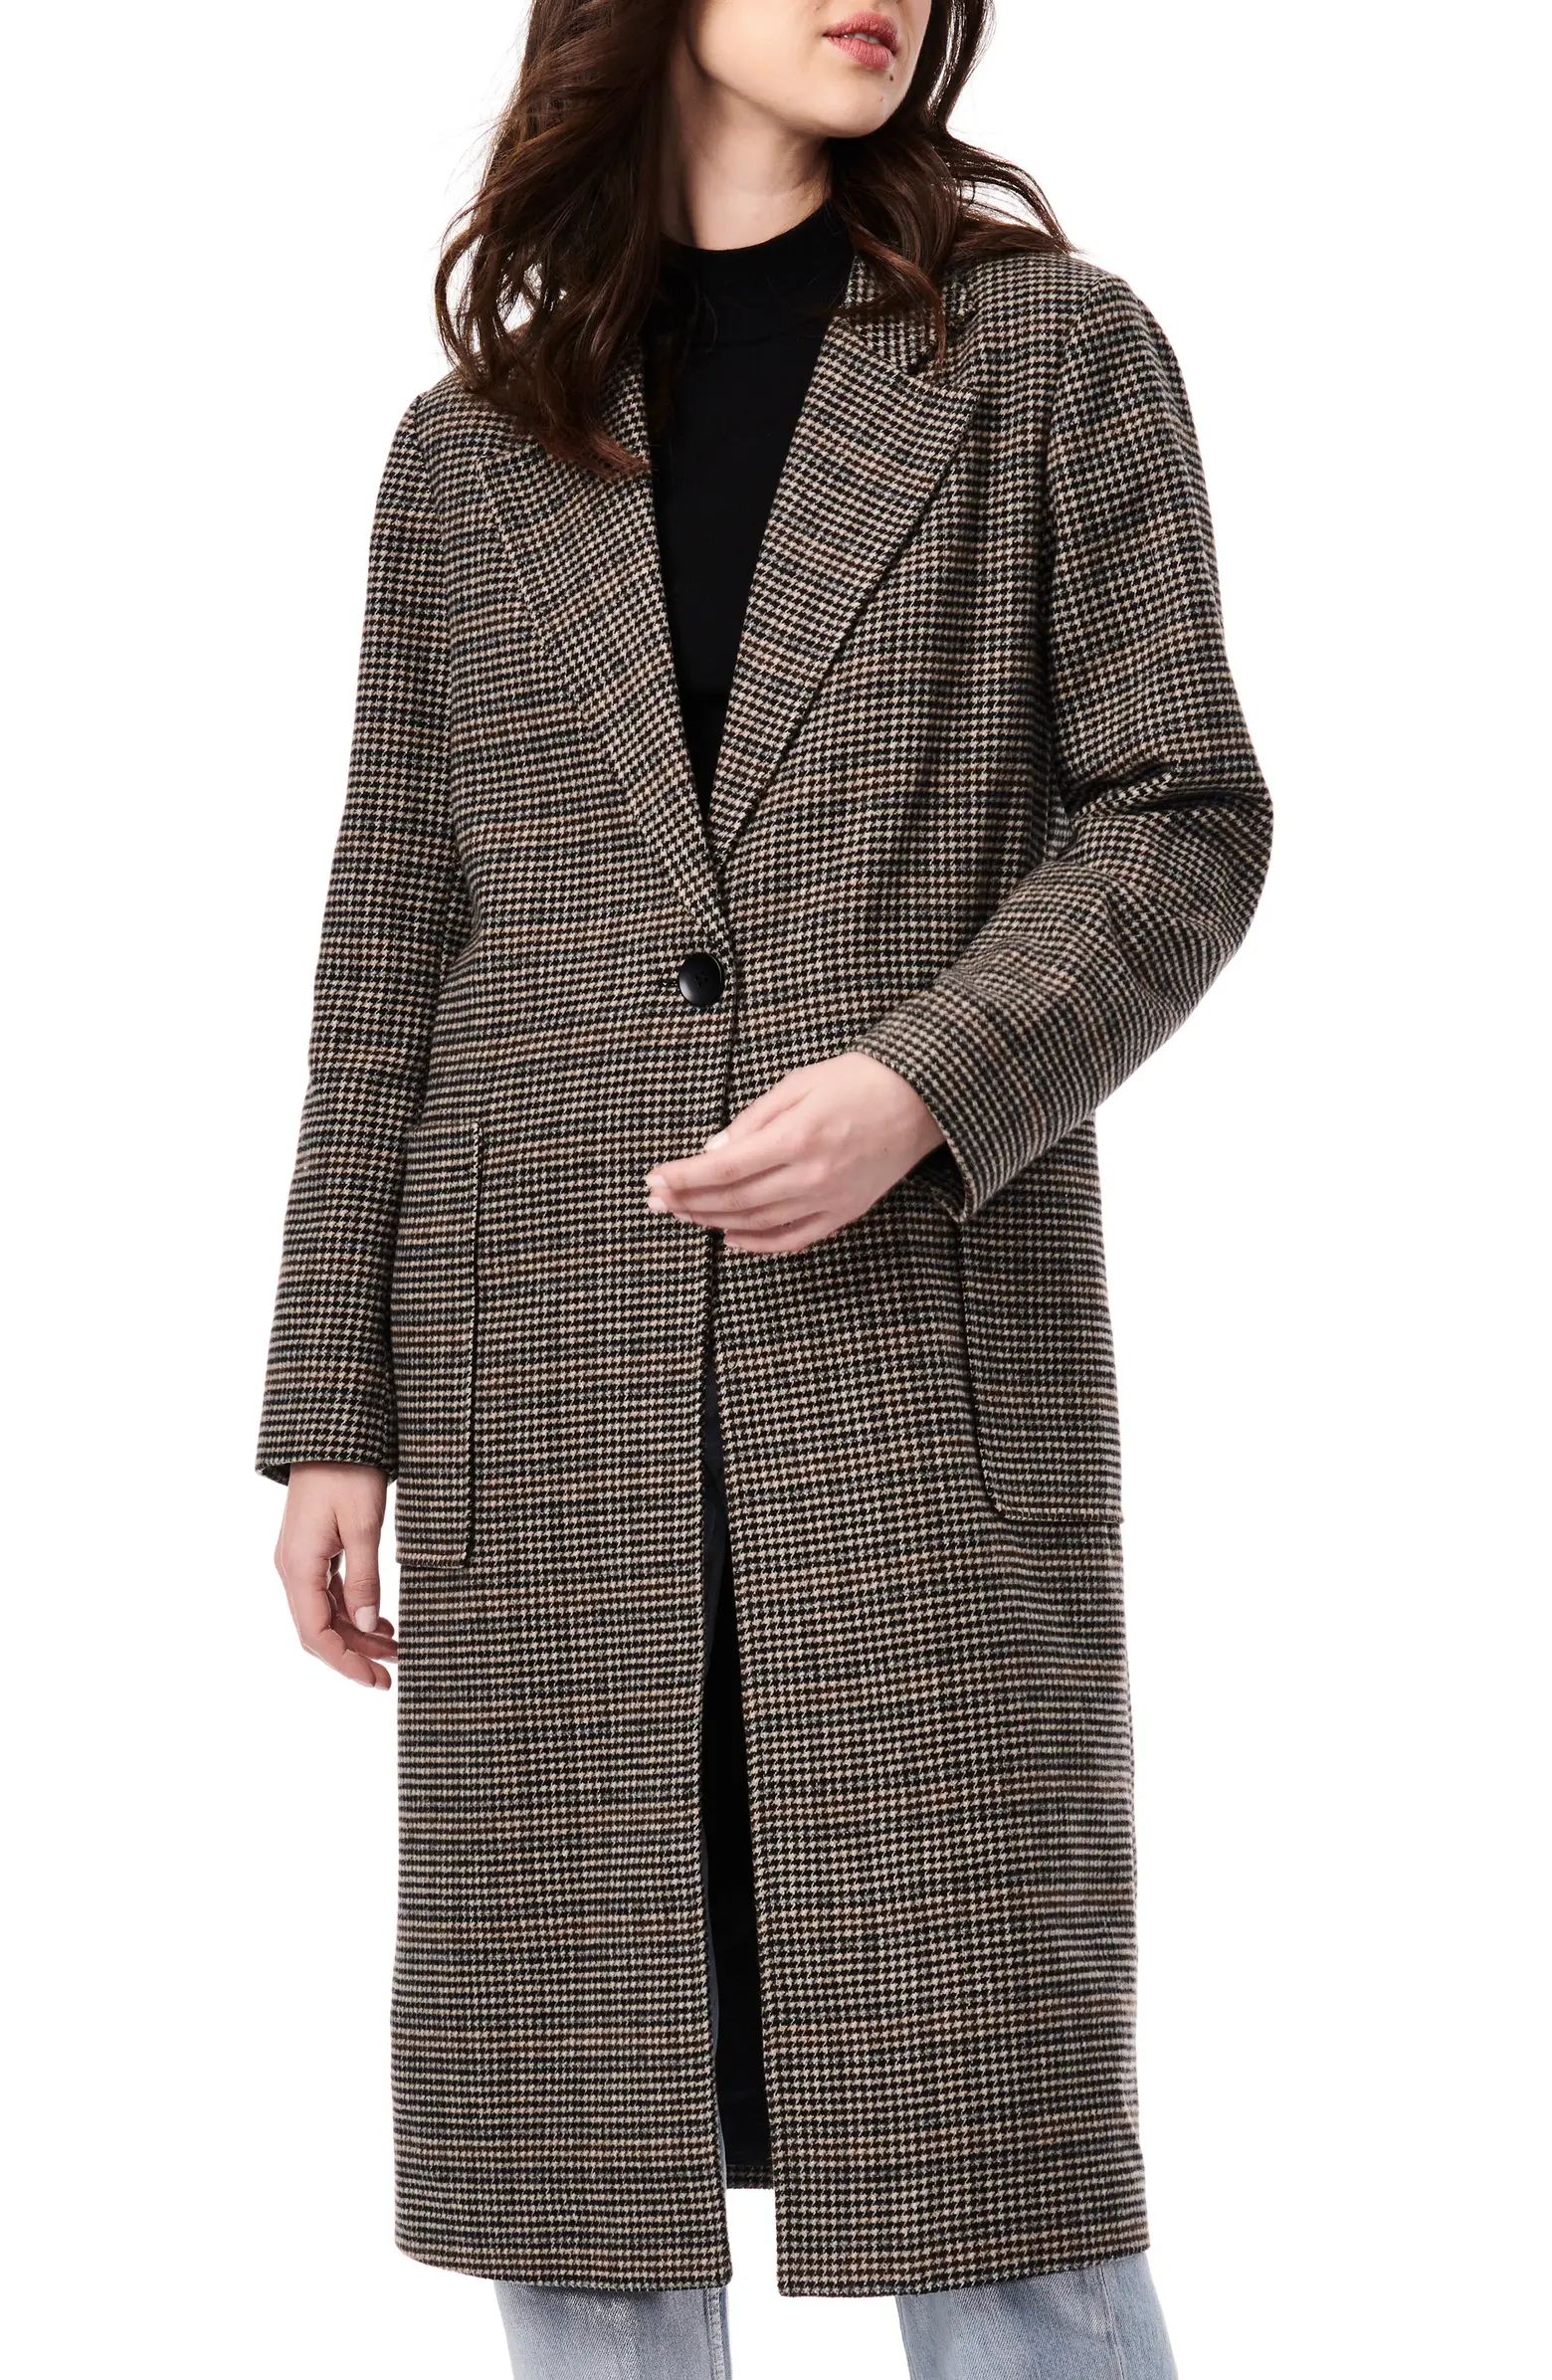 Microhoundstooth Wool Duster Coat | Nordstrom